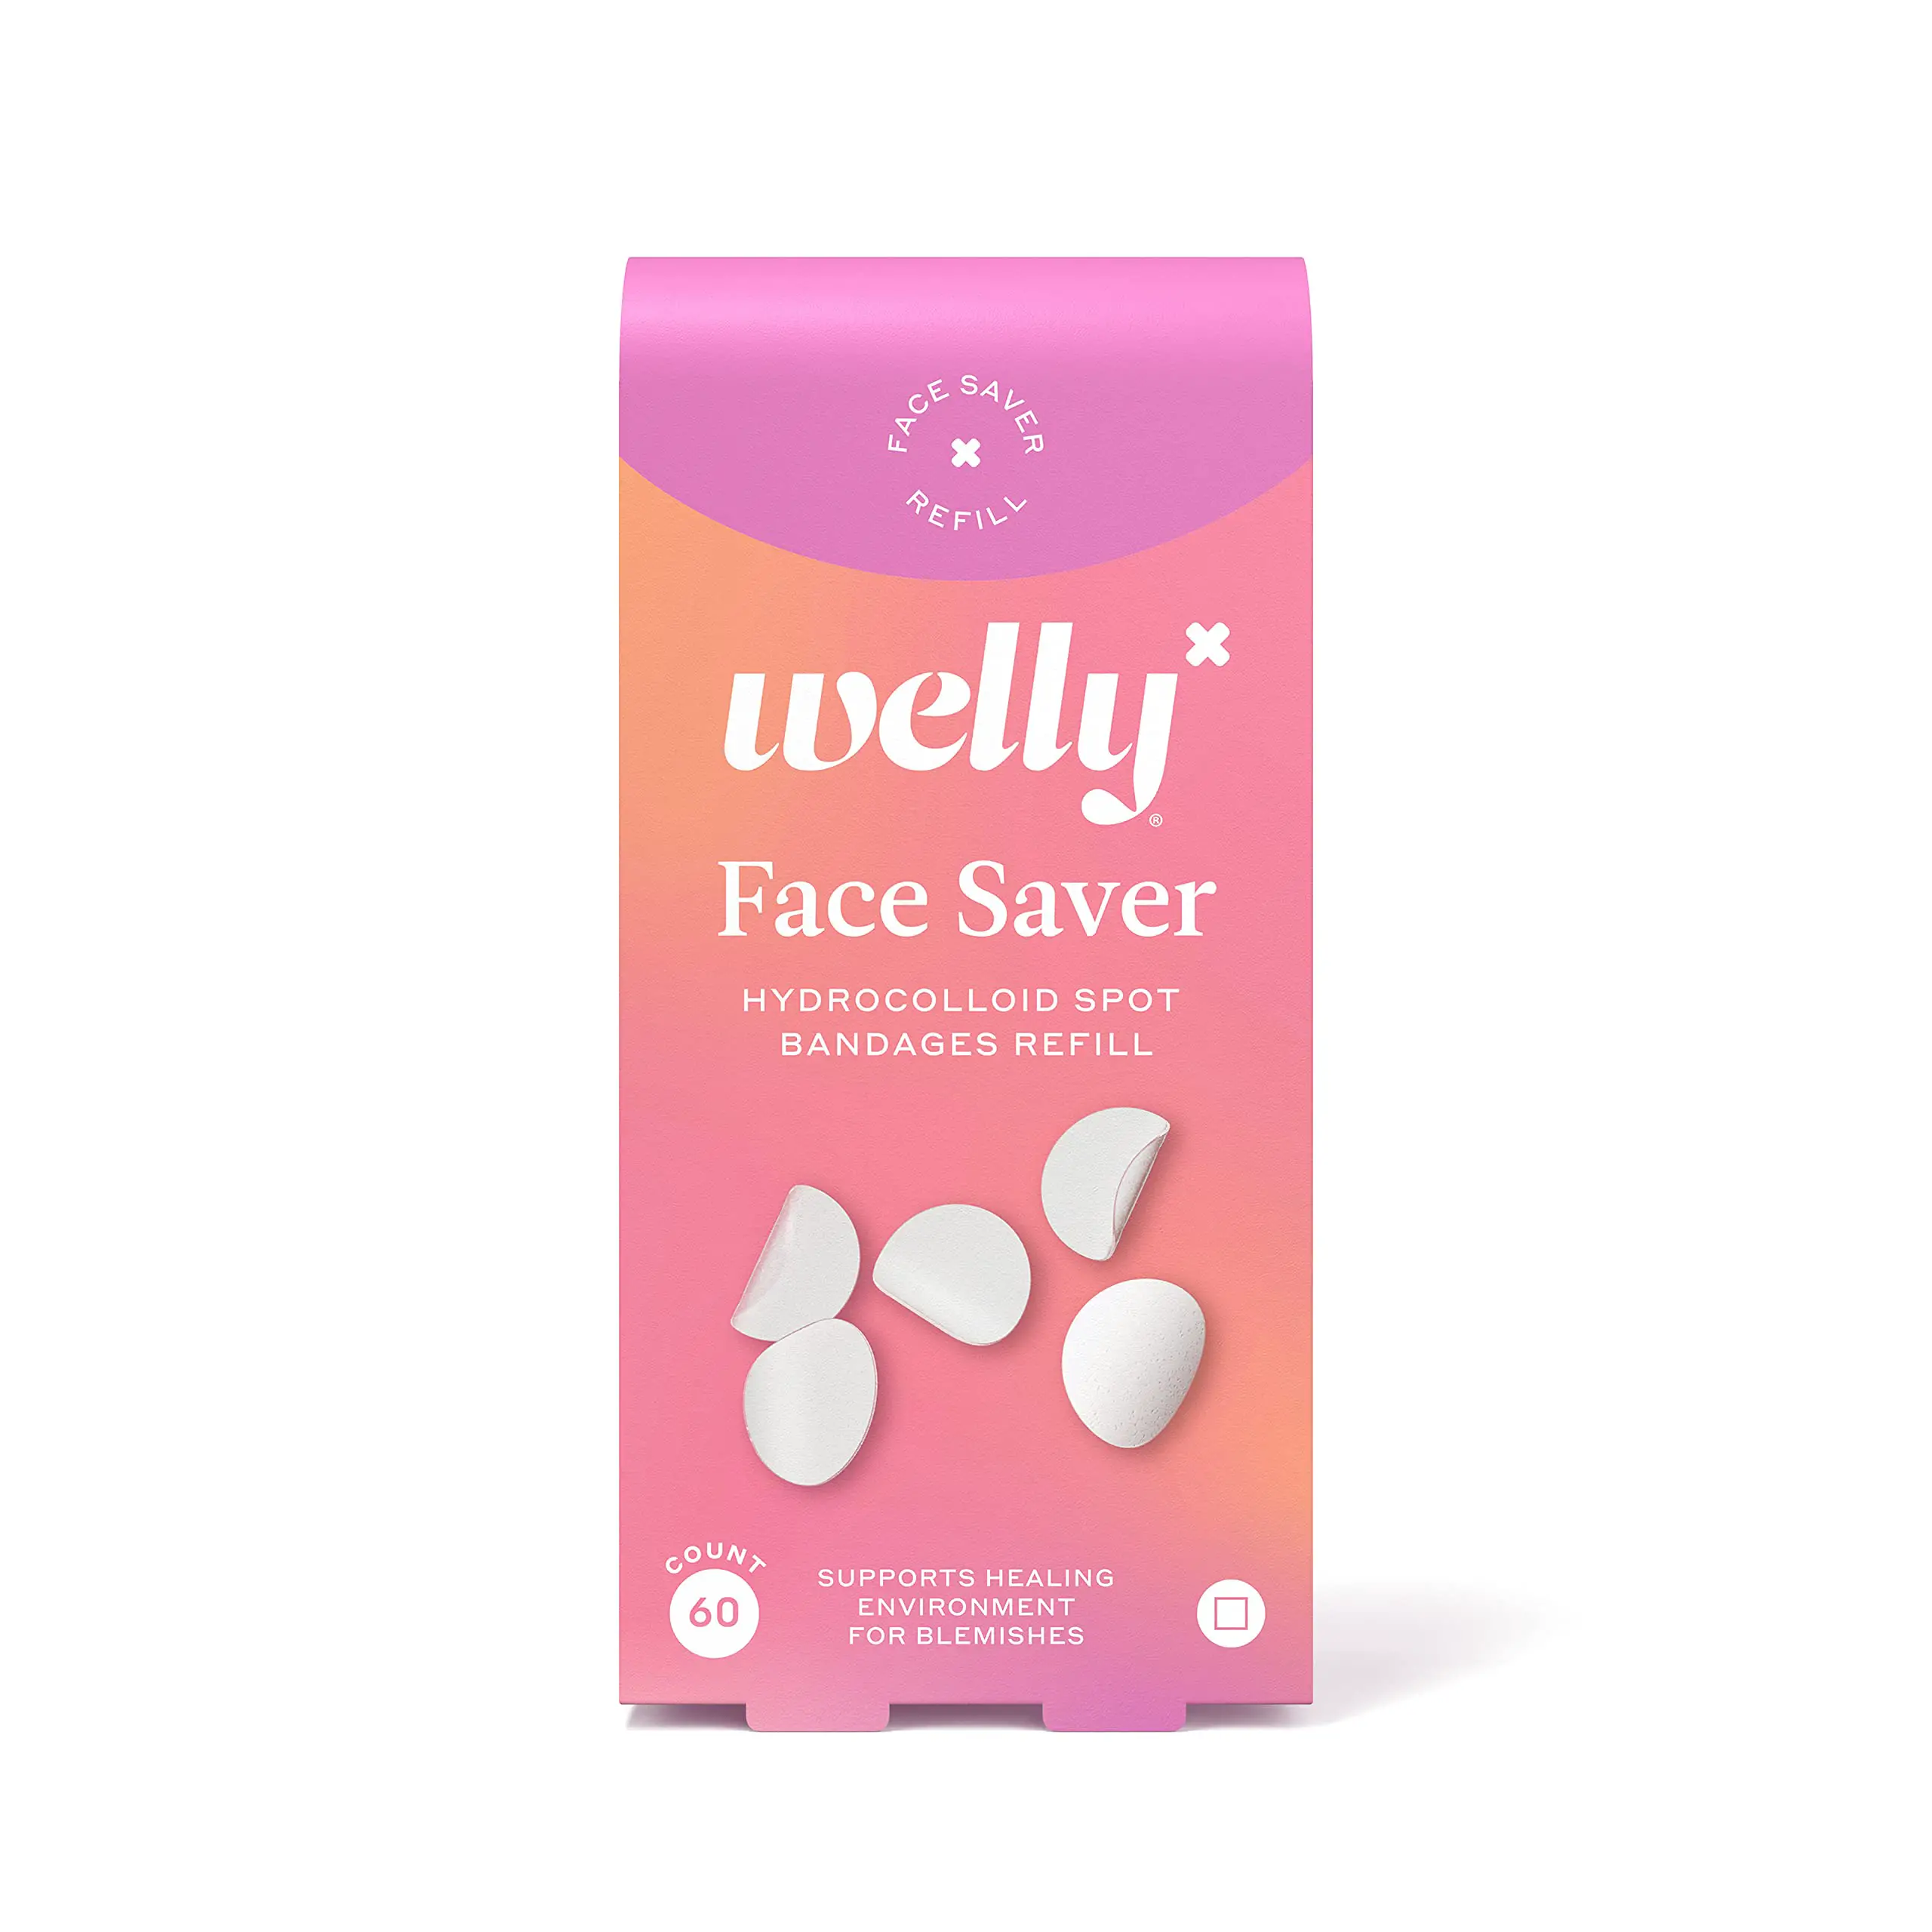 Welly Bandages - Face Saver